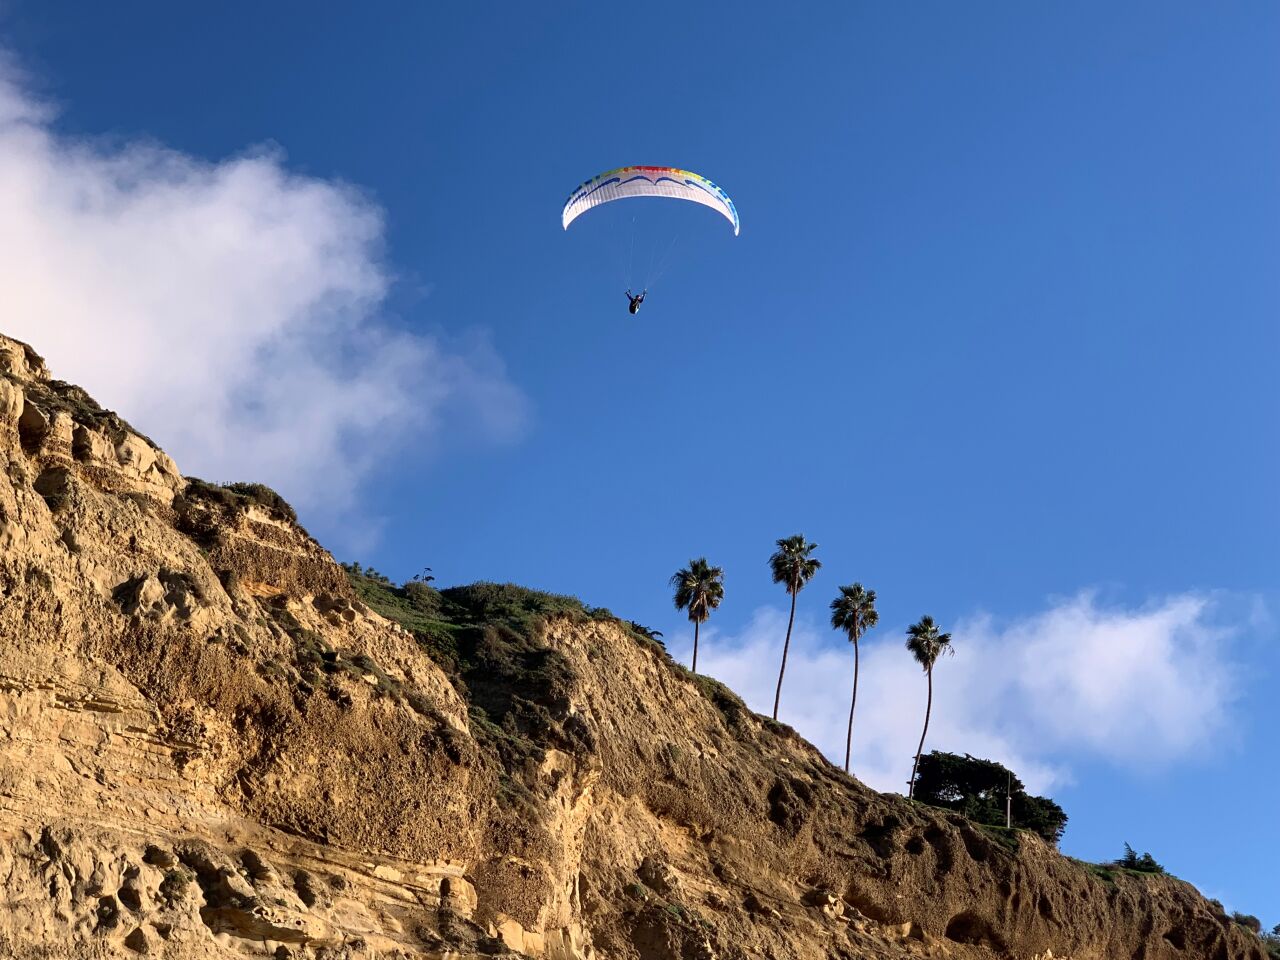 A paraglider soars high above the cliffs on the way to Black’s Beach.